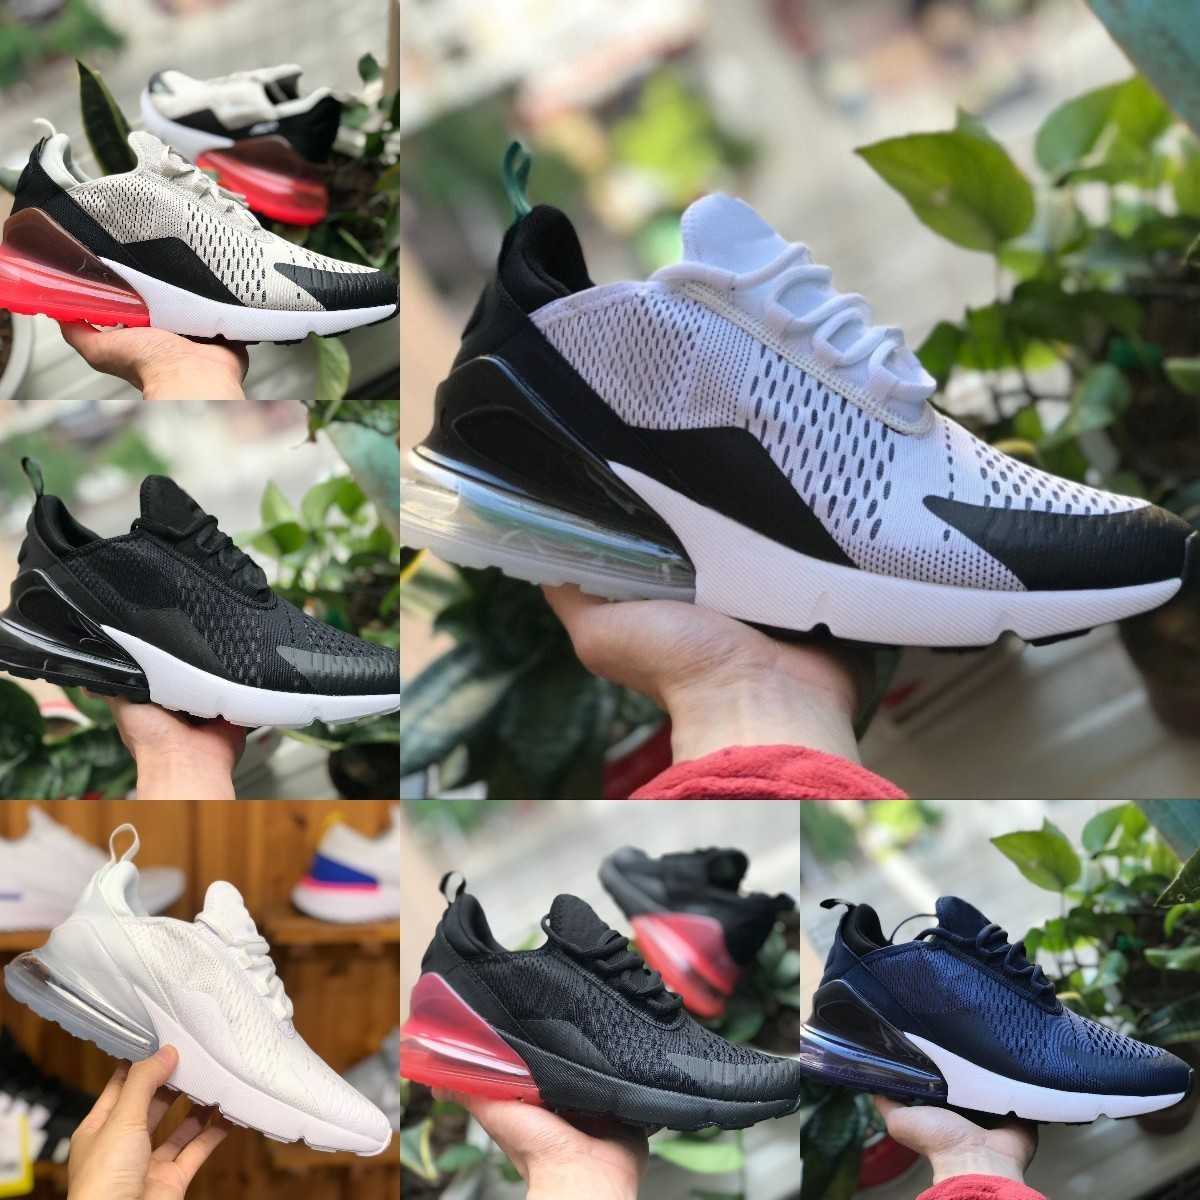 

Dusty Cactus 270 Shoes Mens Tennis Runner Sneakers Triple Black White 270s Cactus Light Bone Be True Barely Rose Volt Women Breathable Mesh Trainer Sports Designers, Please contact us